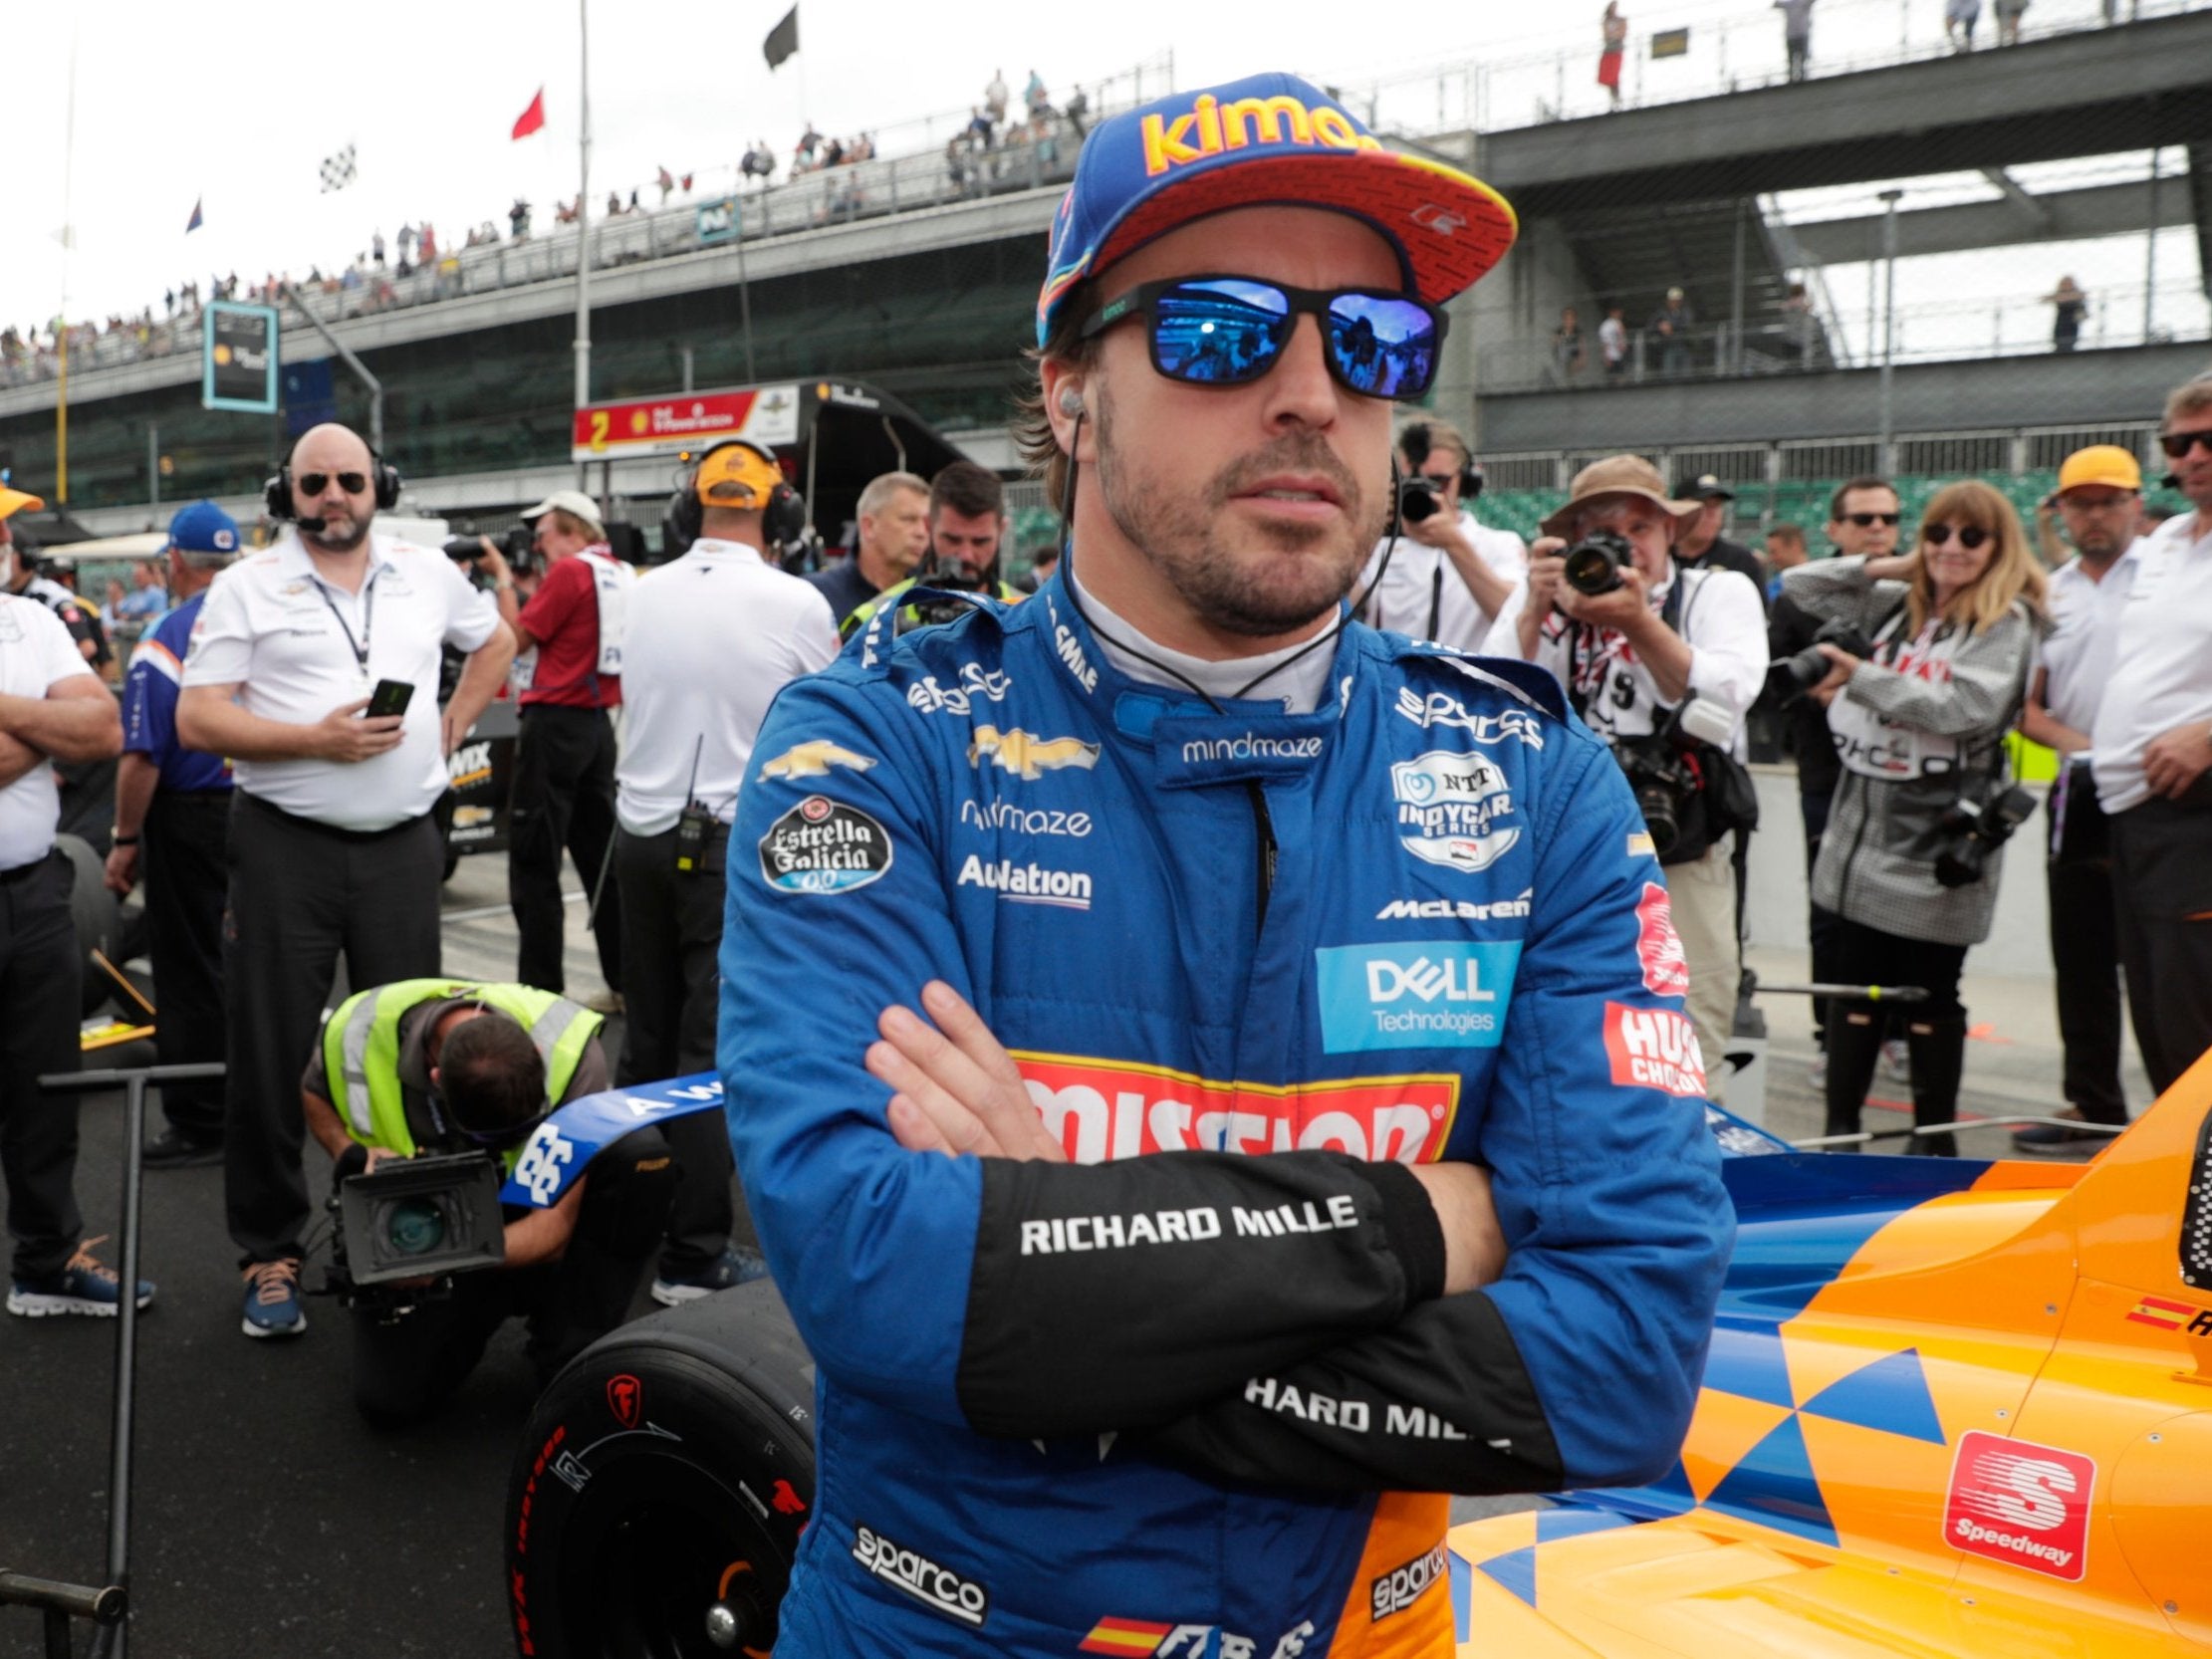 Fernando Alonso failed to qualify for the the Indy 500